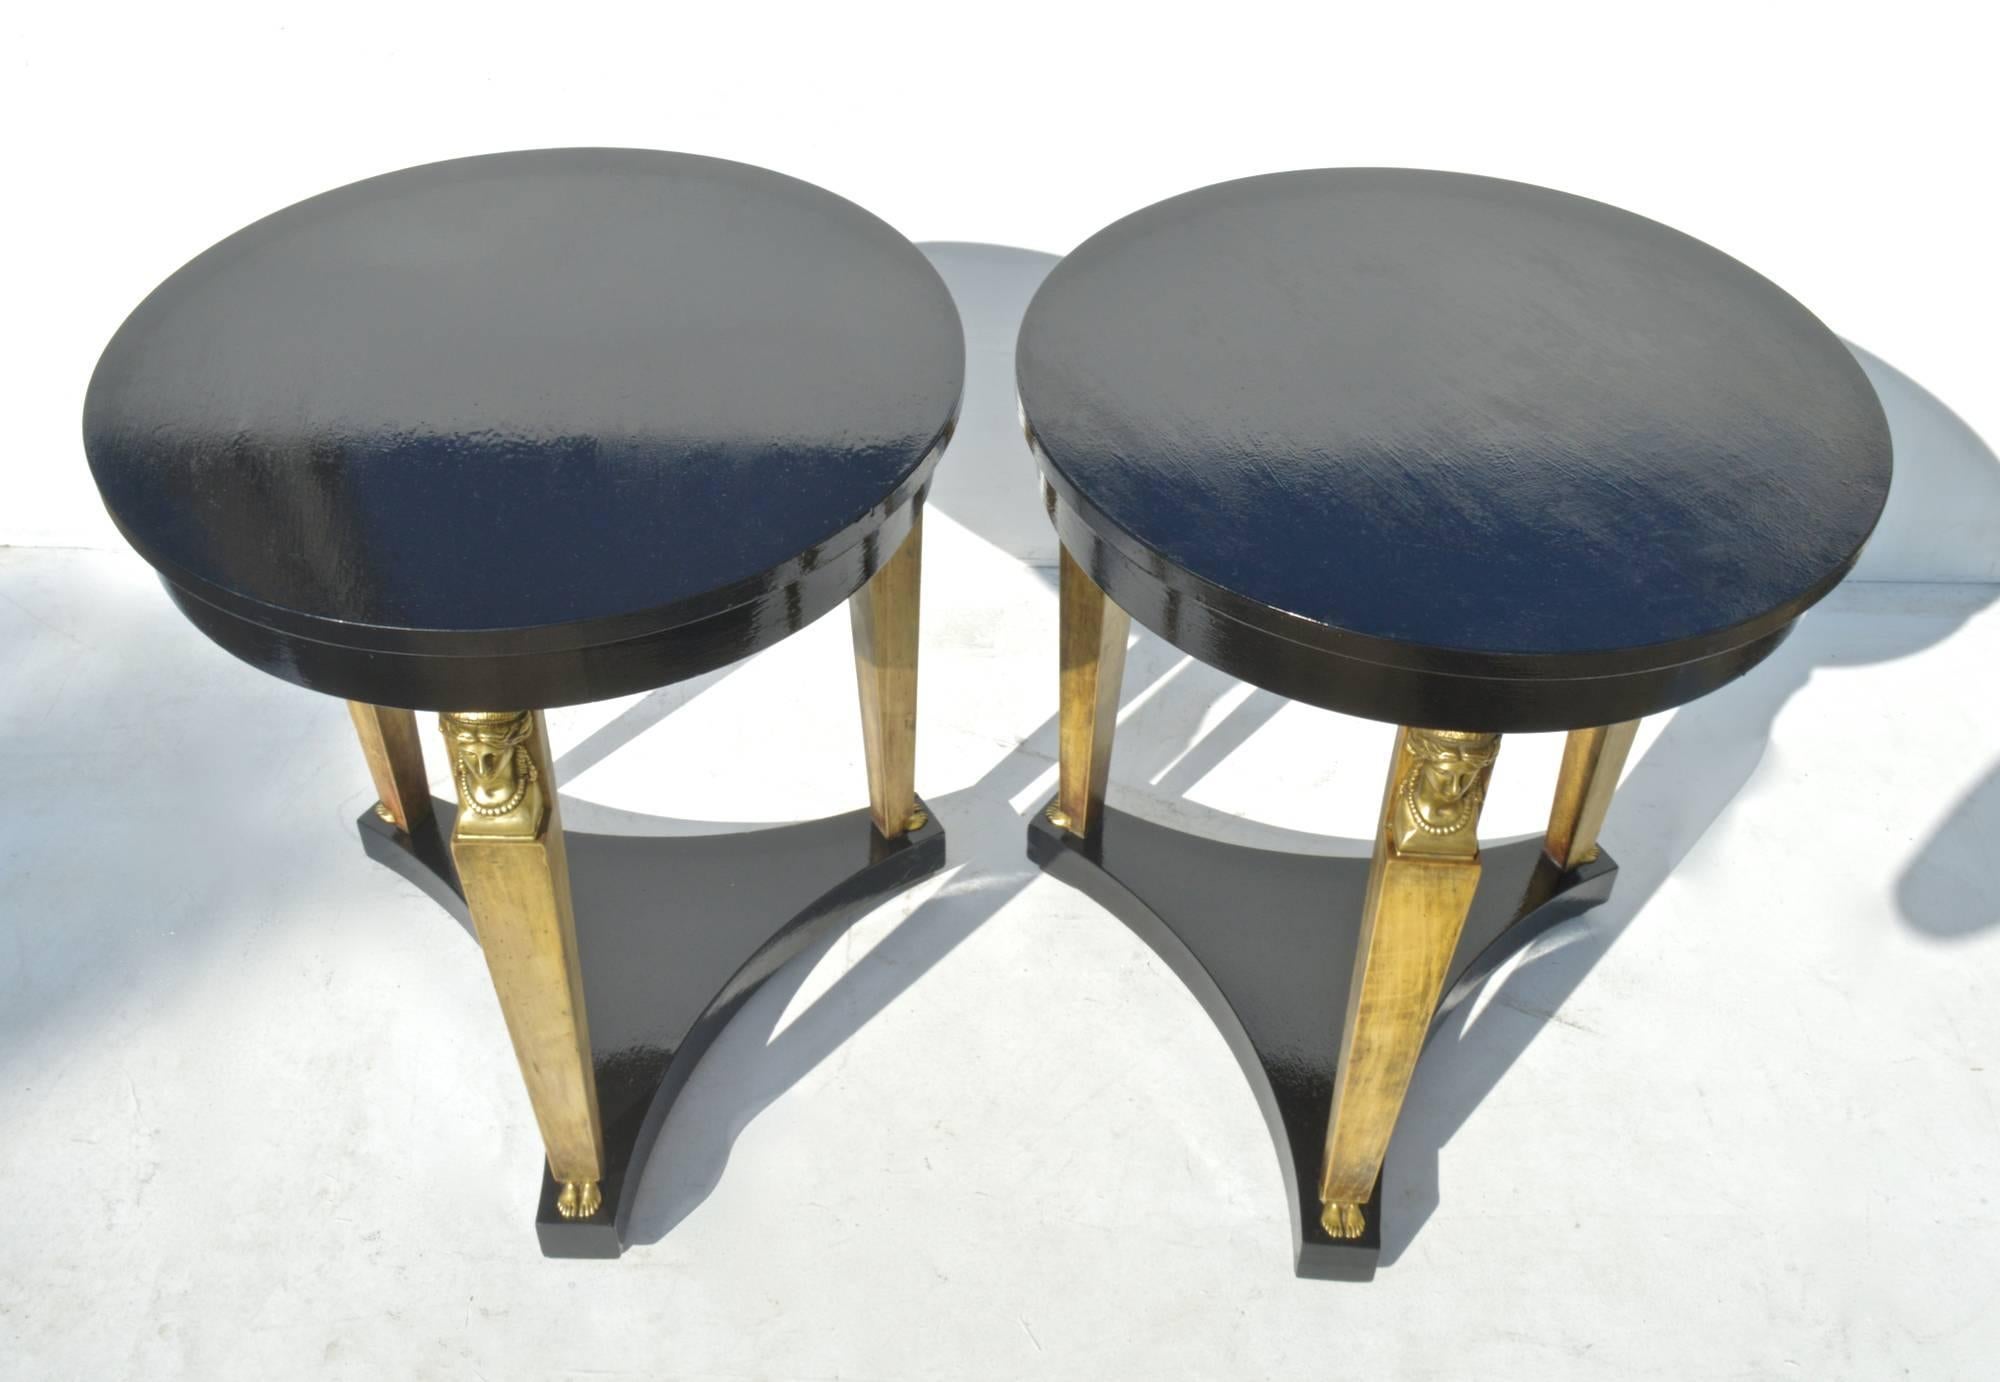 Neoclassical Revival Neoclassical Ebonized Side / End Tables by Baker, Pair For Sale